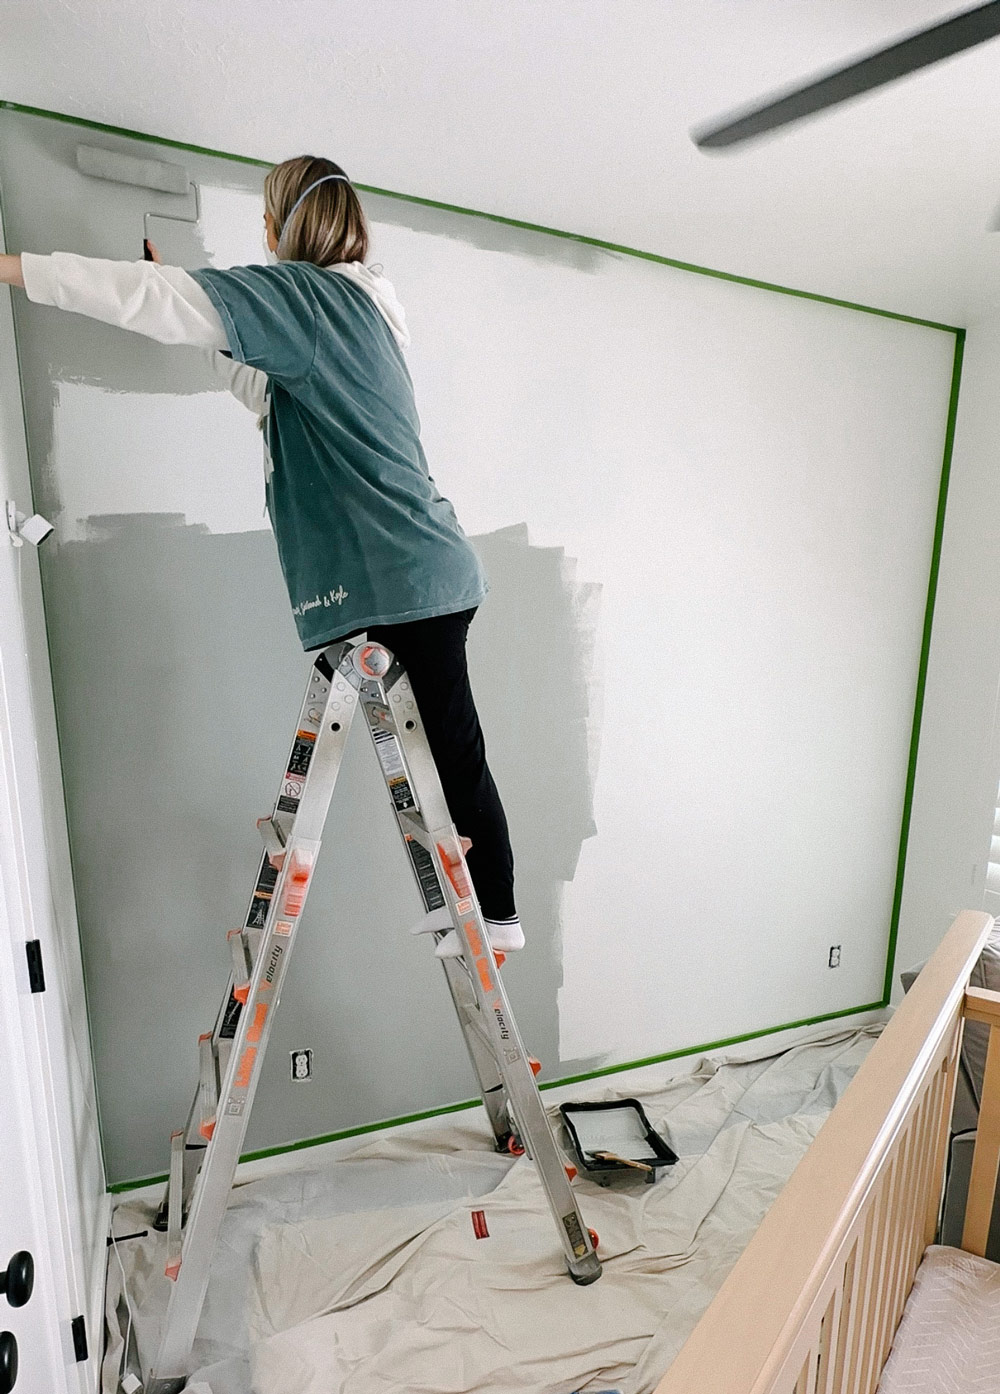 A person painting an accent wall.